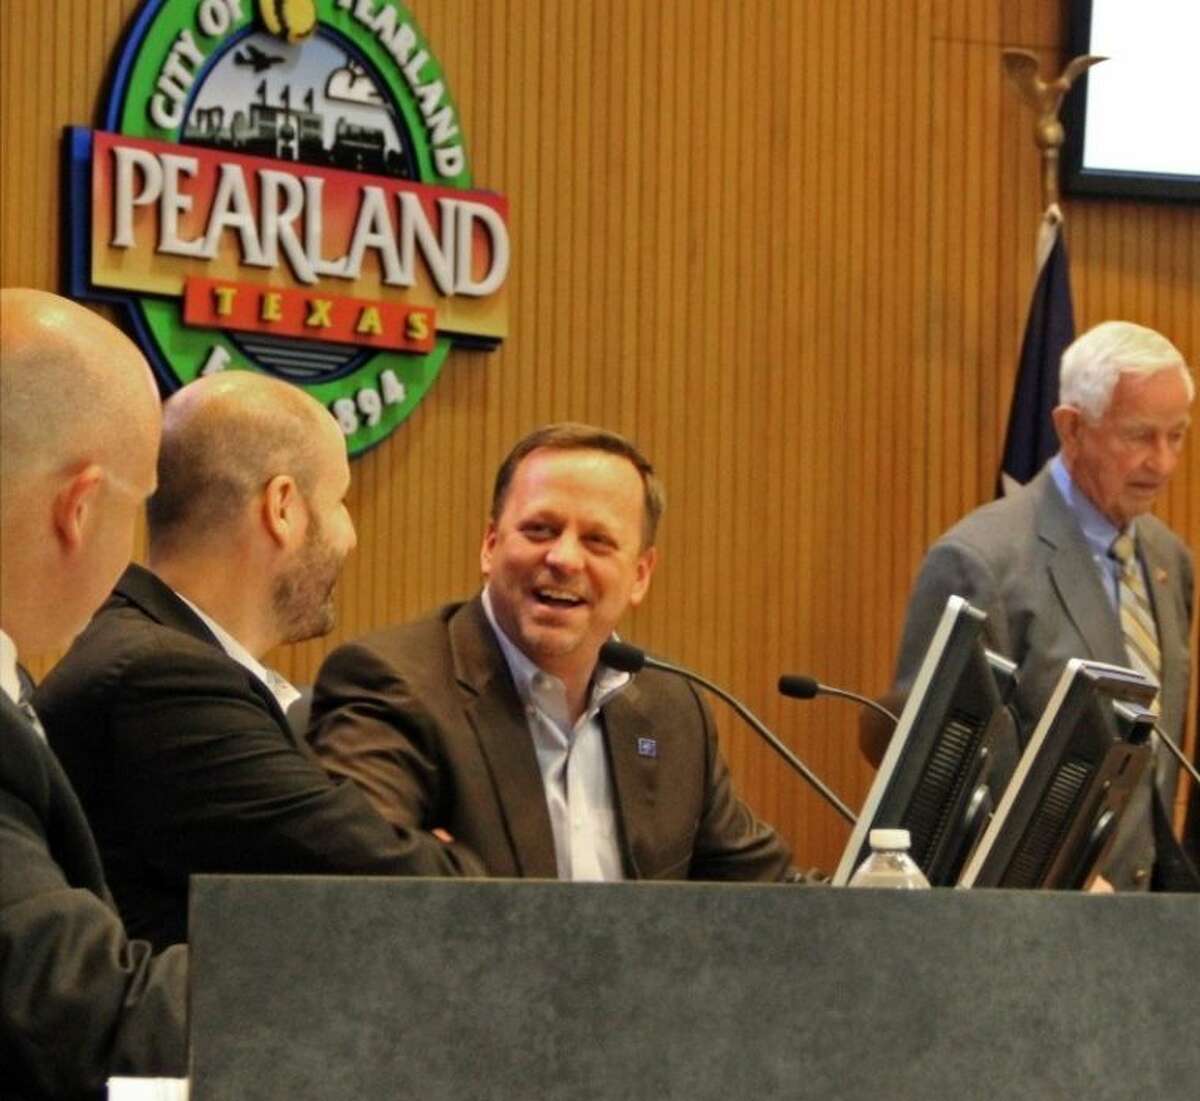 Pearland City Councilmember Keith Ordeneaux was unanmimously electged Mayor Pro Tem at a City Council meeting held Monday (May 19).